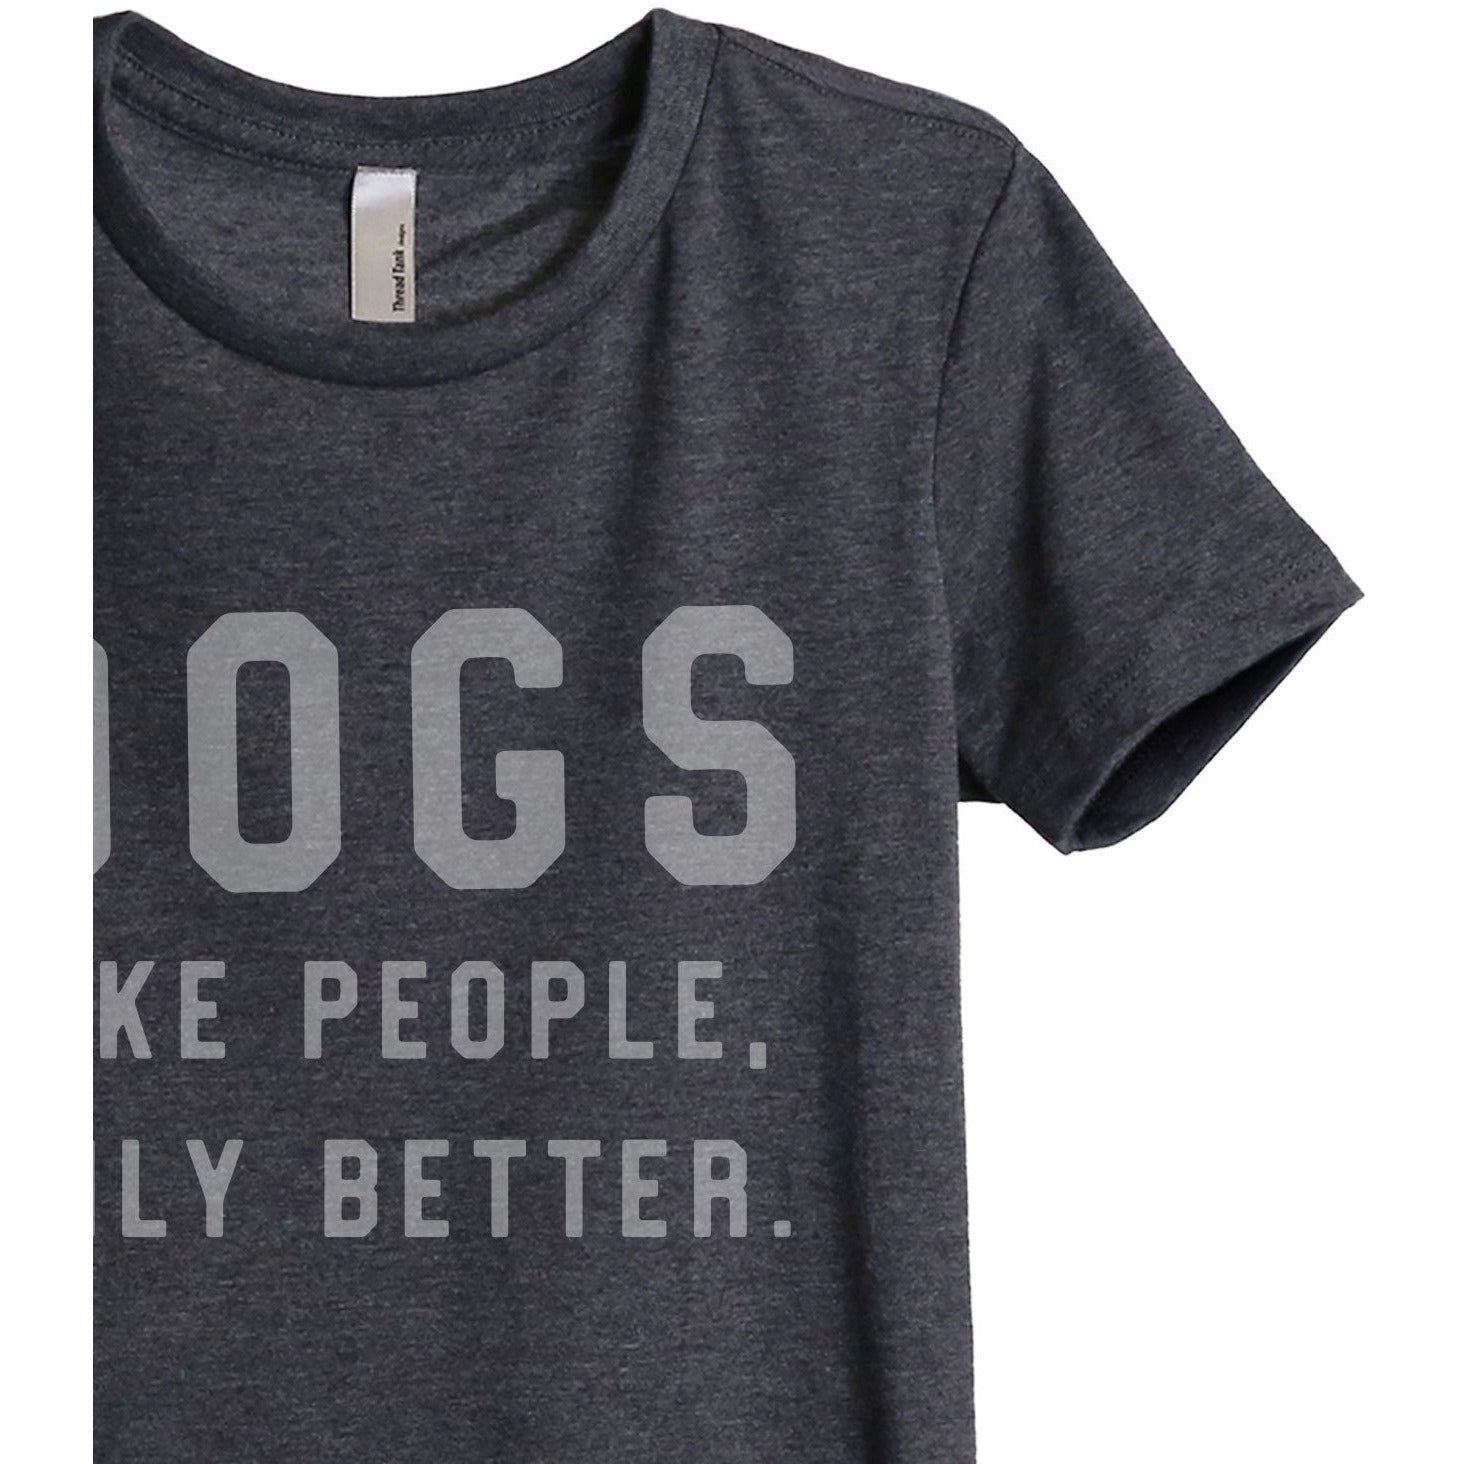 Dogs Like People Only Better Women's Relaxed Crewneck T-Shirt Top Tee Charcoal Grey Zoom Details